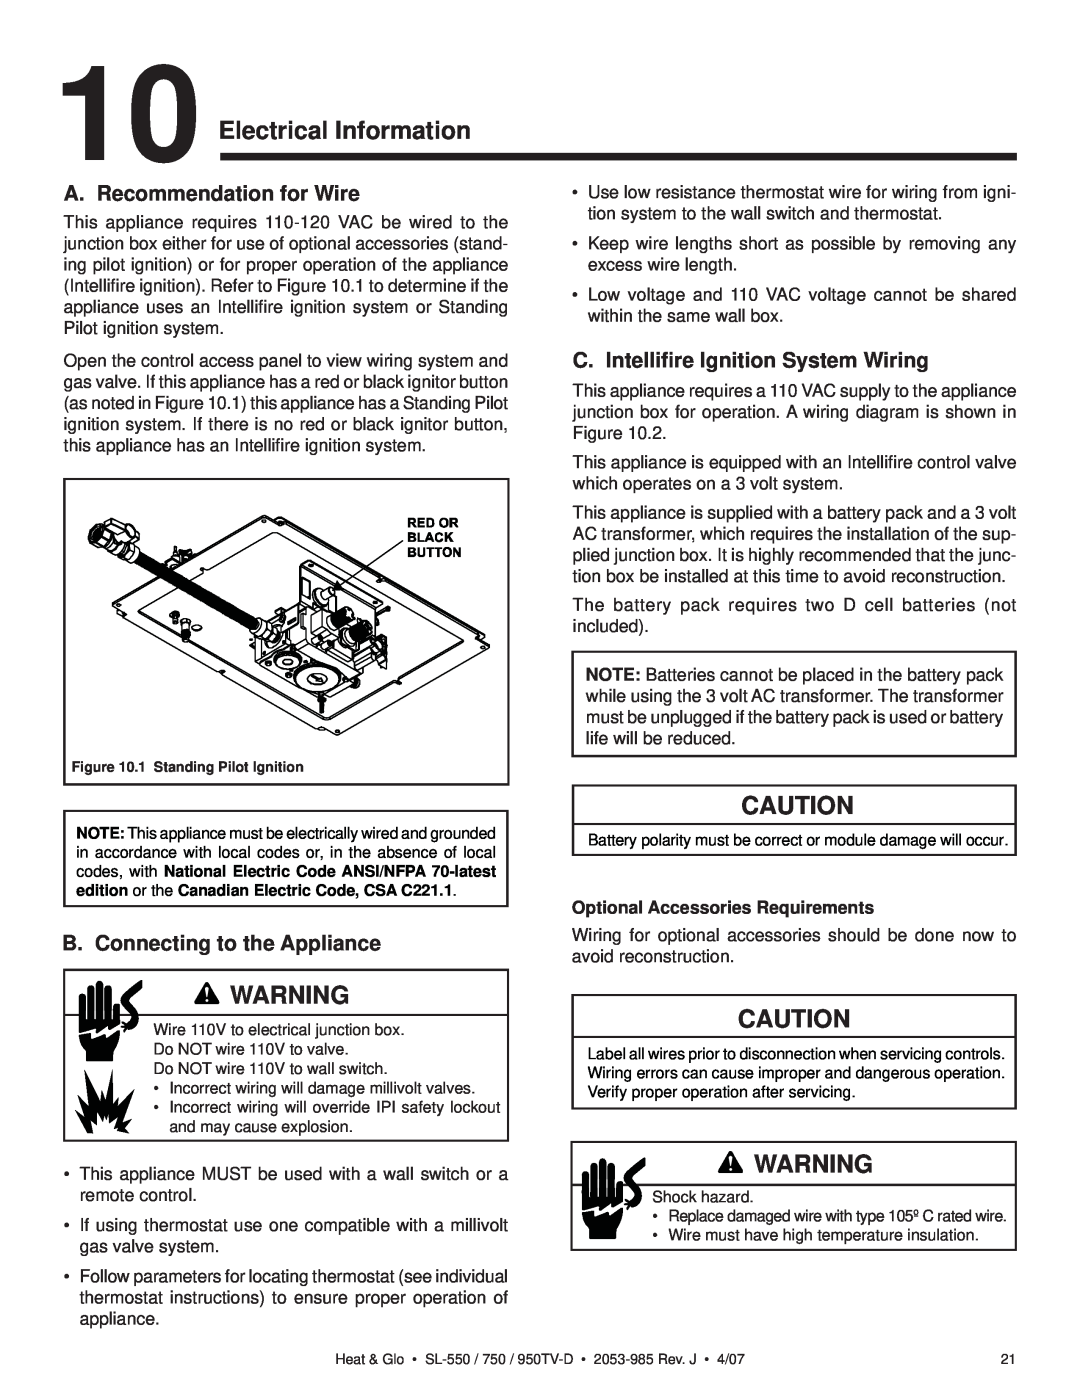 Heat & Glo LifeStyle SL-550TV-IPI-D Electrical Information, A. Recommendation for Wire, B. Connecting to the Appliance 